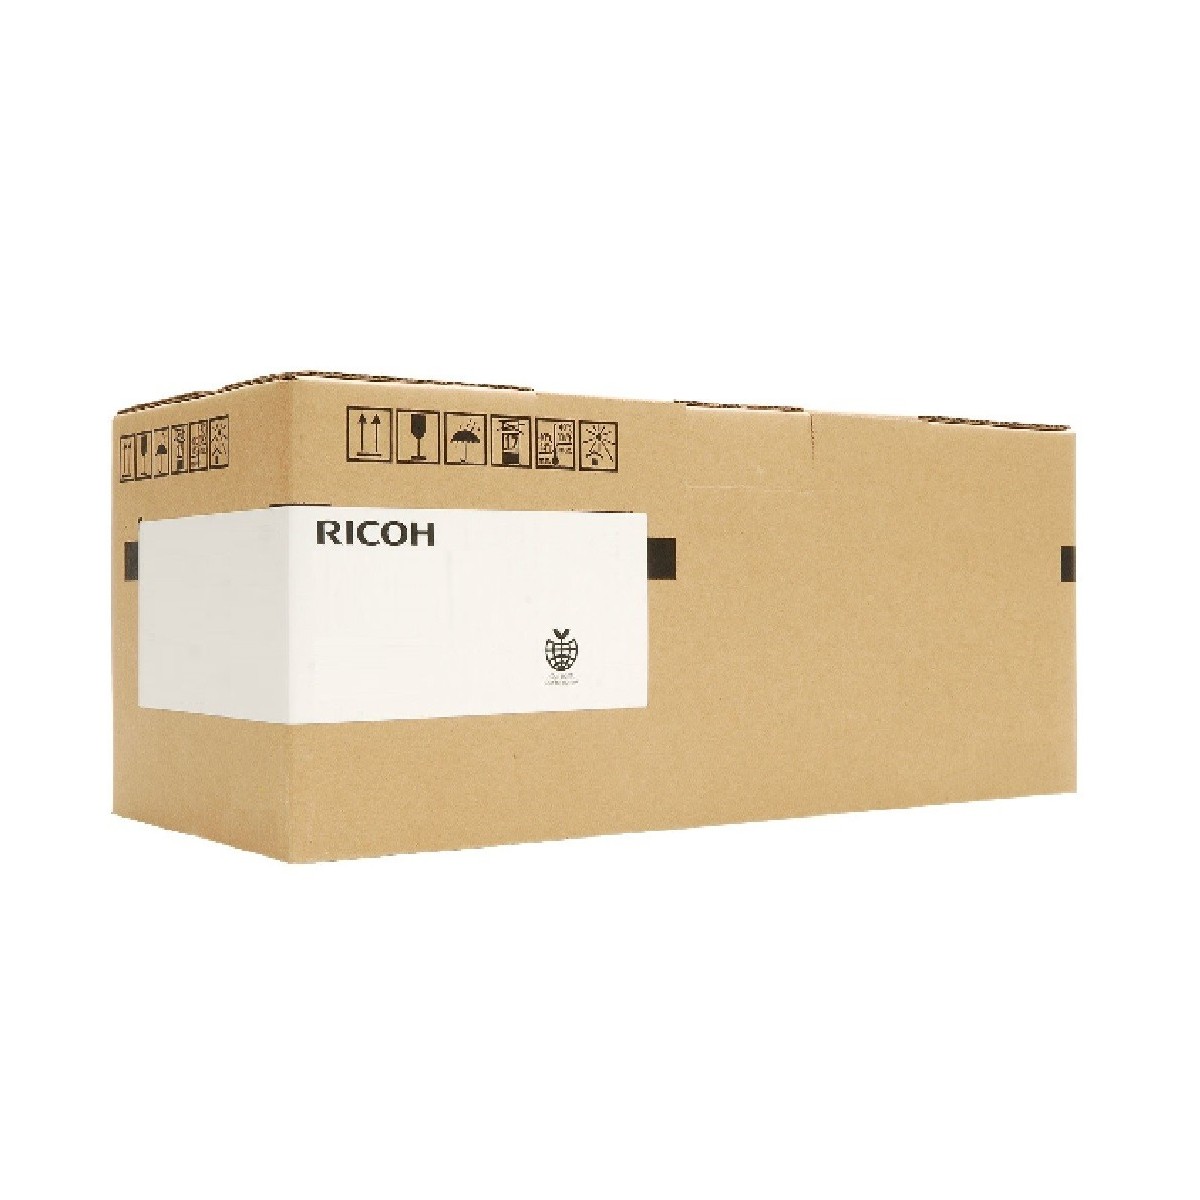 Ricoh AE020209 - Roller - 1 pc(s)